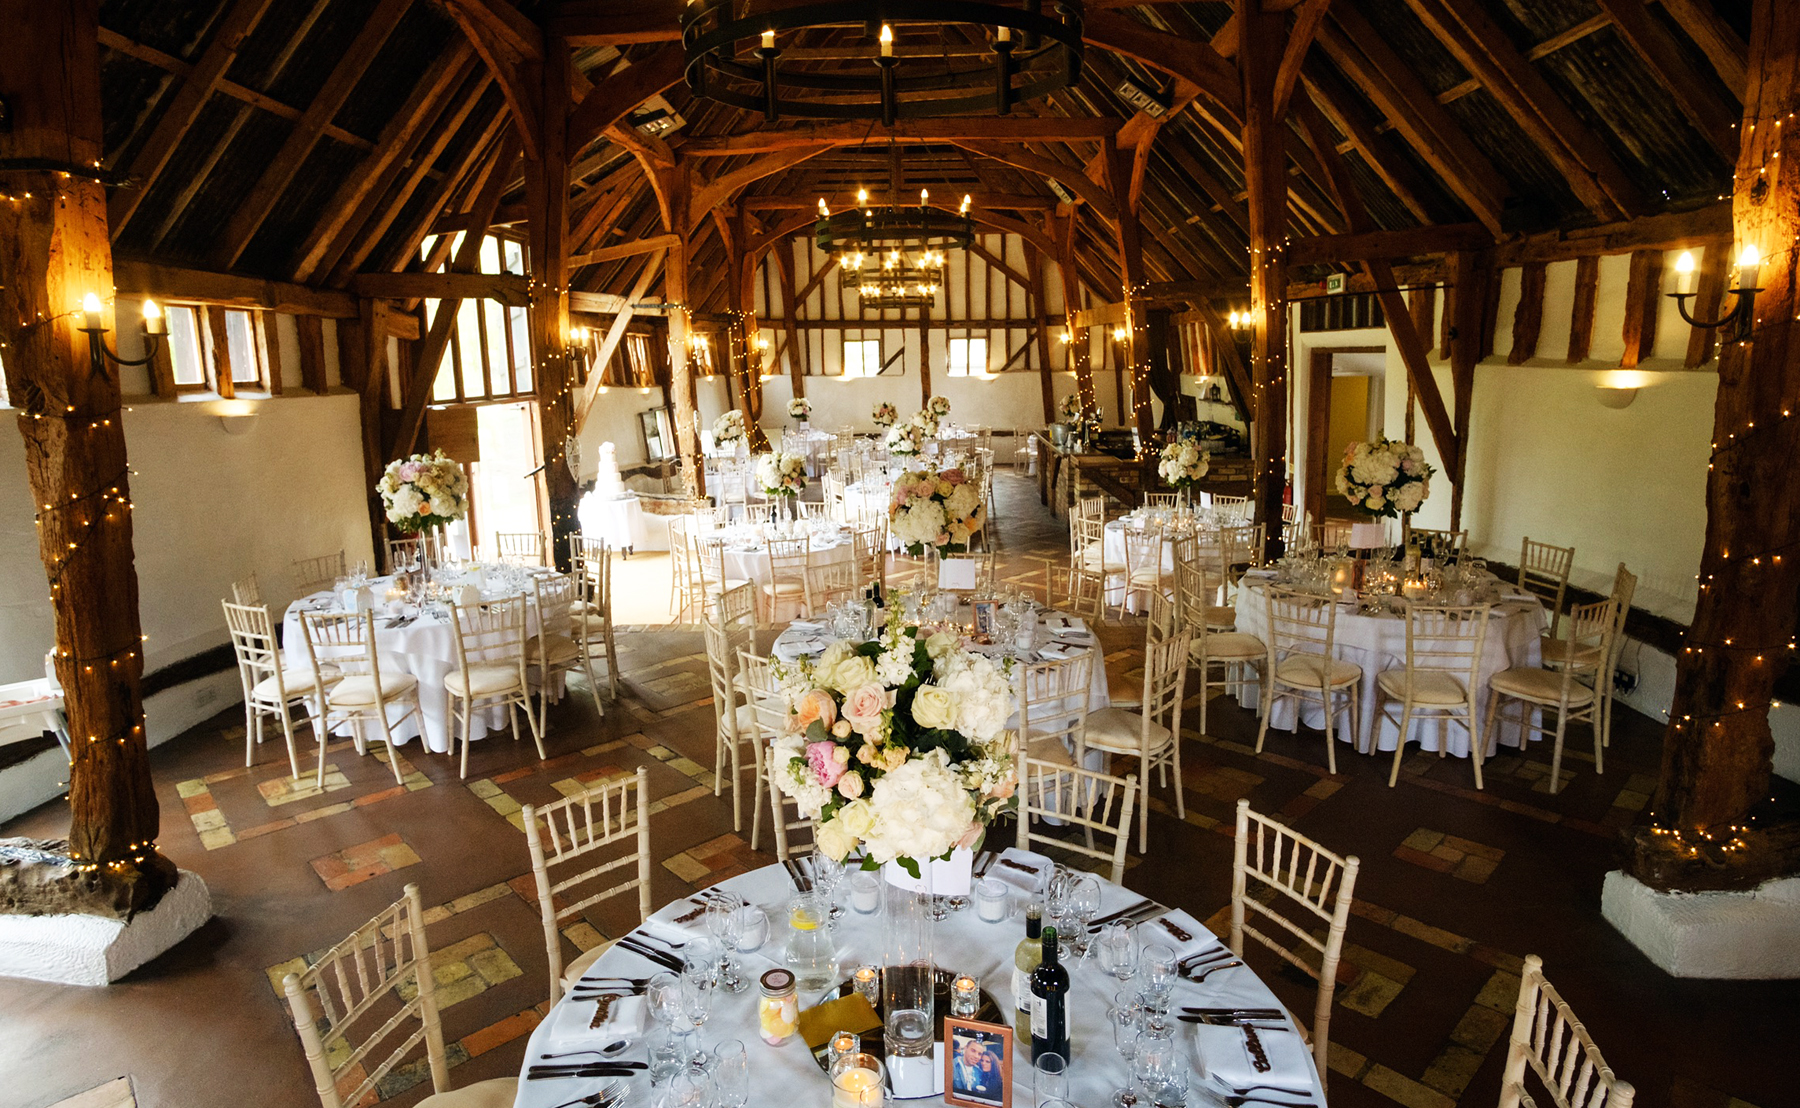 Smeetham Hall Barn Open Day 7th April 2019 from 10.30-1.30… Complimentary fizz and nibbles!